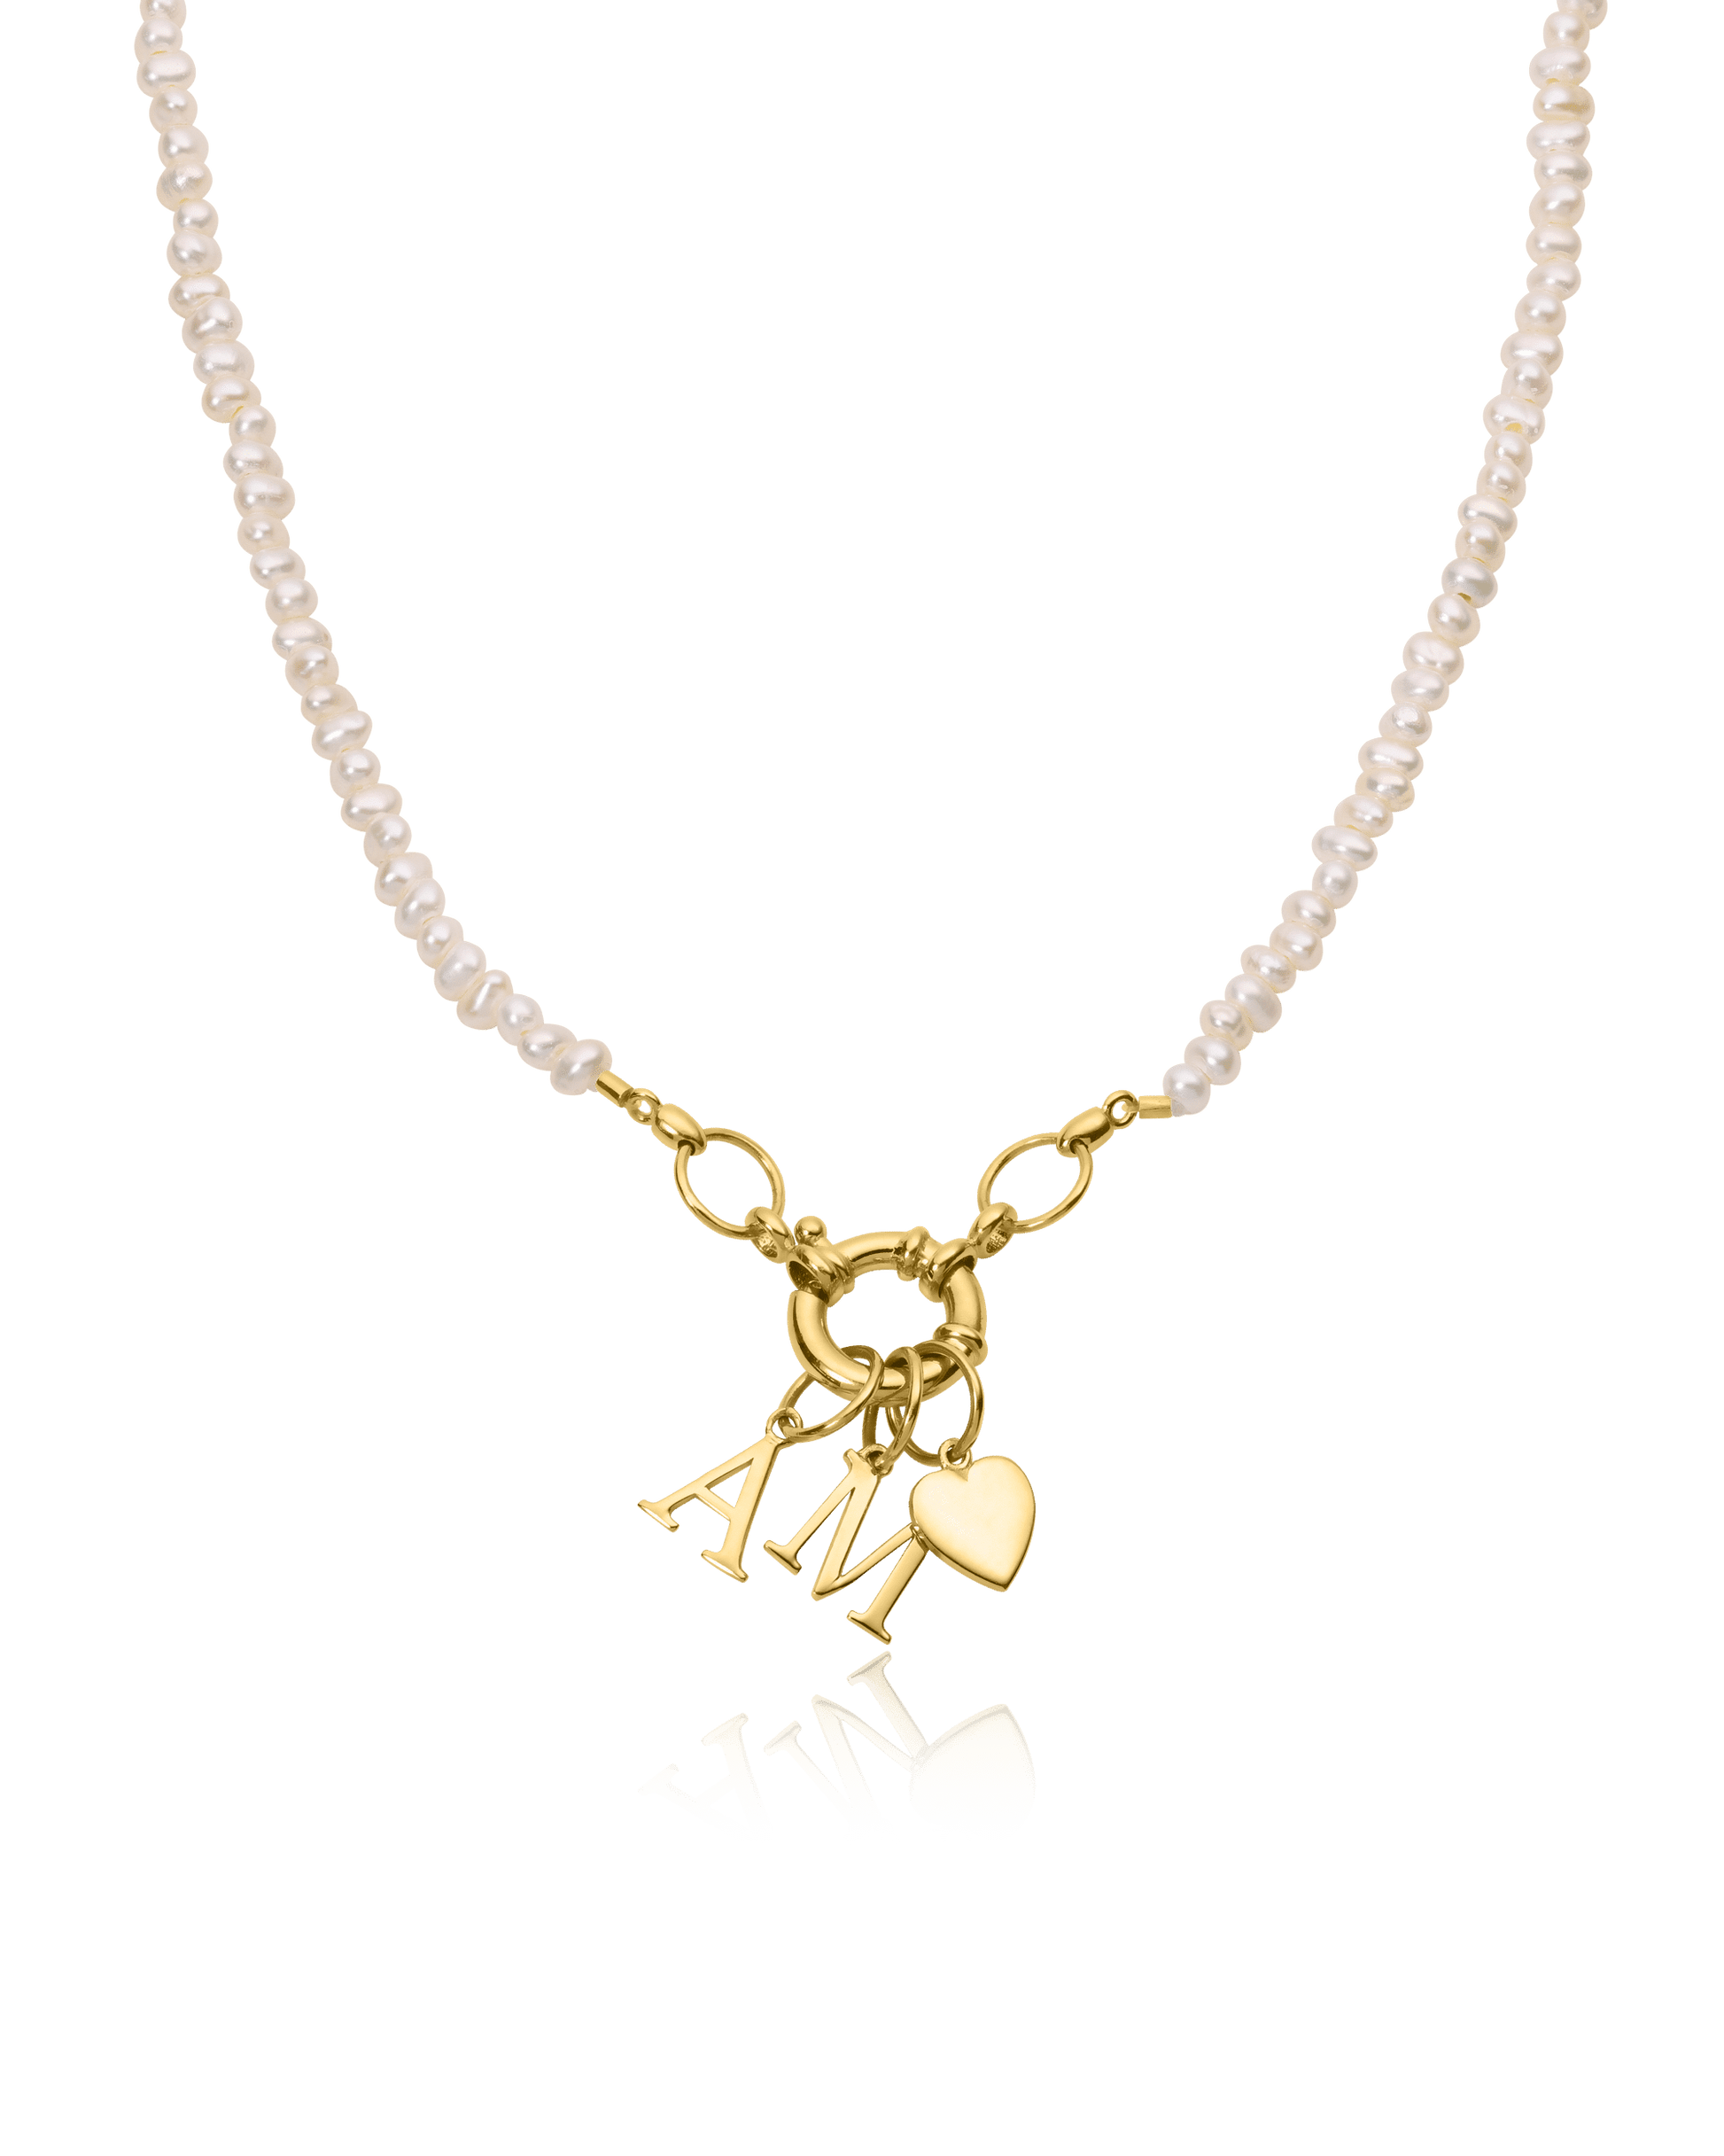 Black Spinnel Charm Lock Necklace - 18K Gold Vermeil Necklaces magal-dev Pearl (OUT OF STOCK) 1 Charm 16"